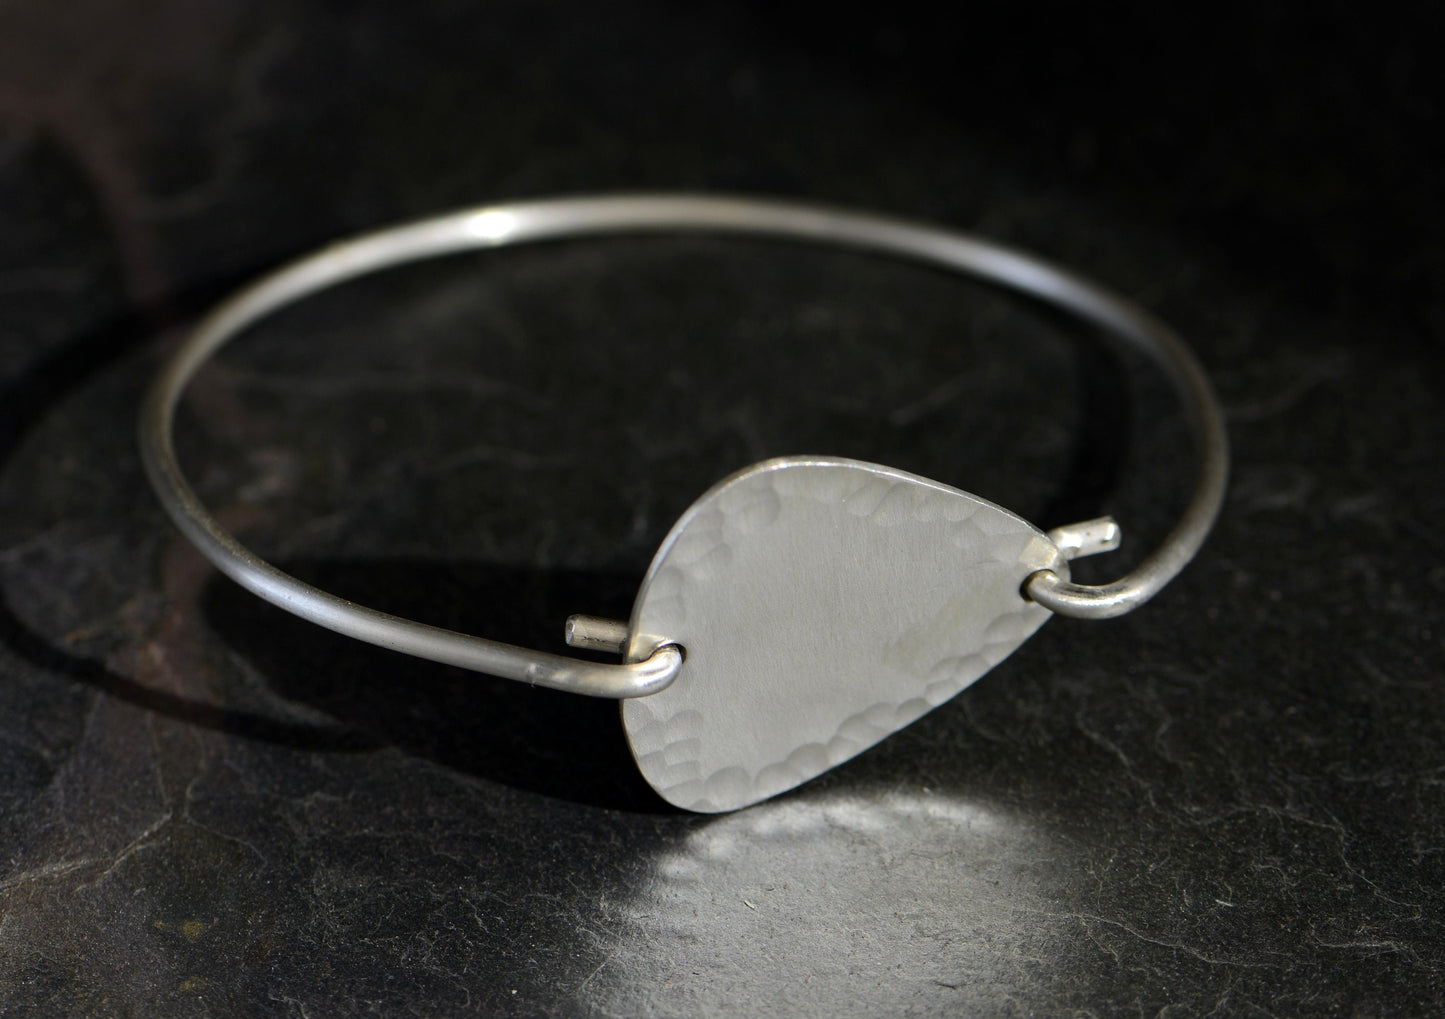 Hammered Tension Bangle with Sterling Silver Guitar Pick